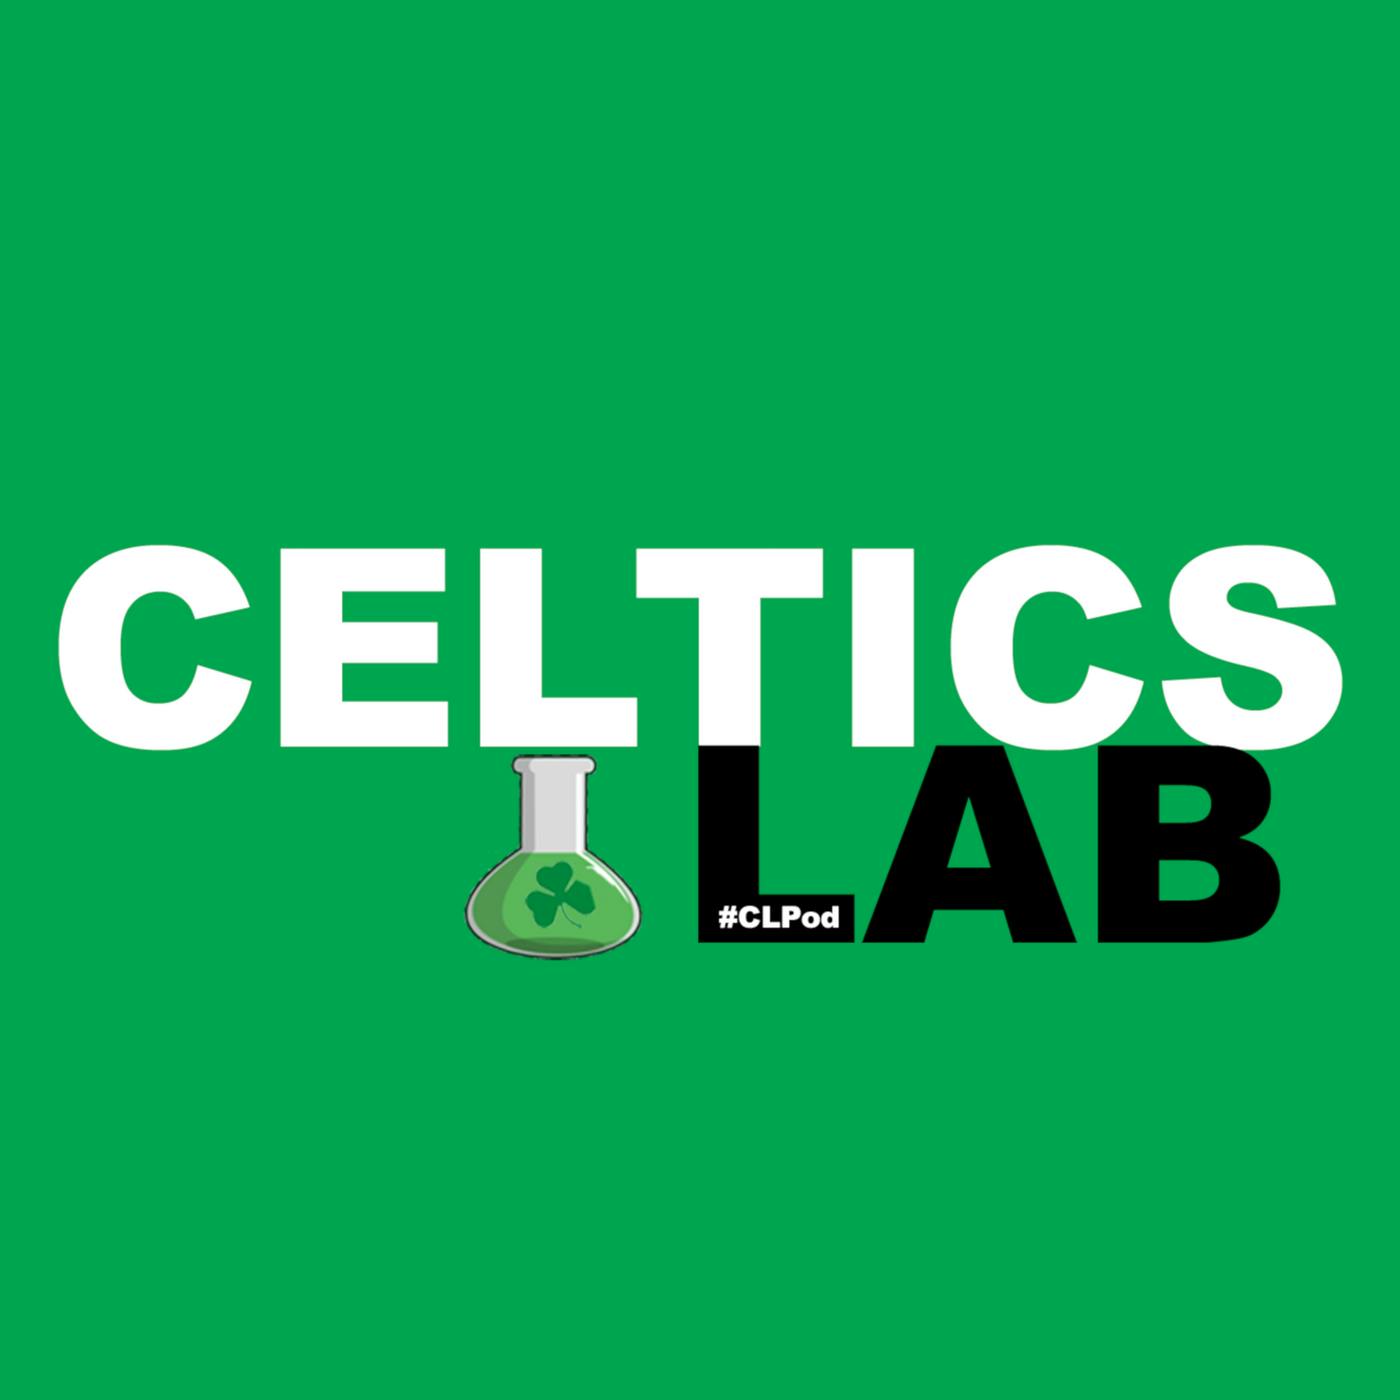 CelticsLife Podcast #012: The Playoff Picture, The Showdown With The Cavs & More